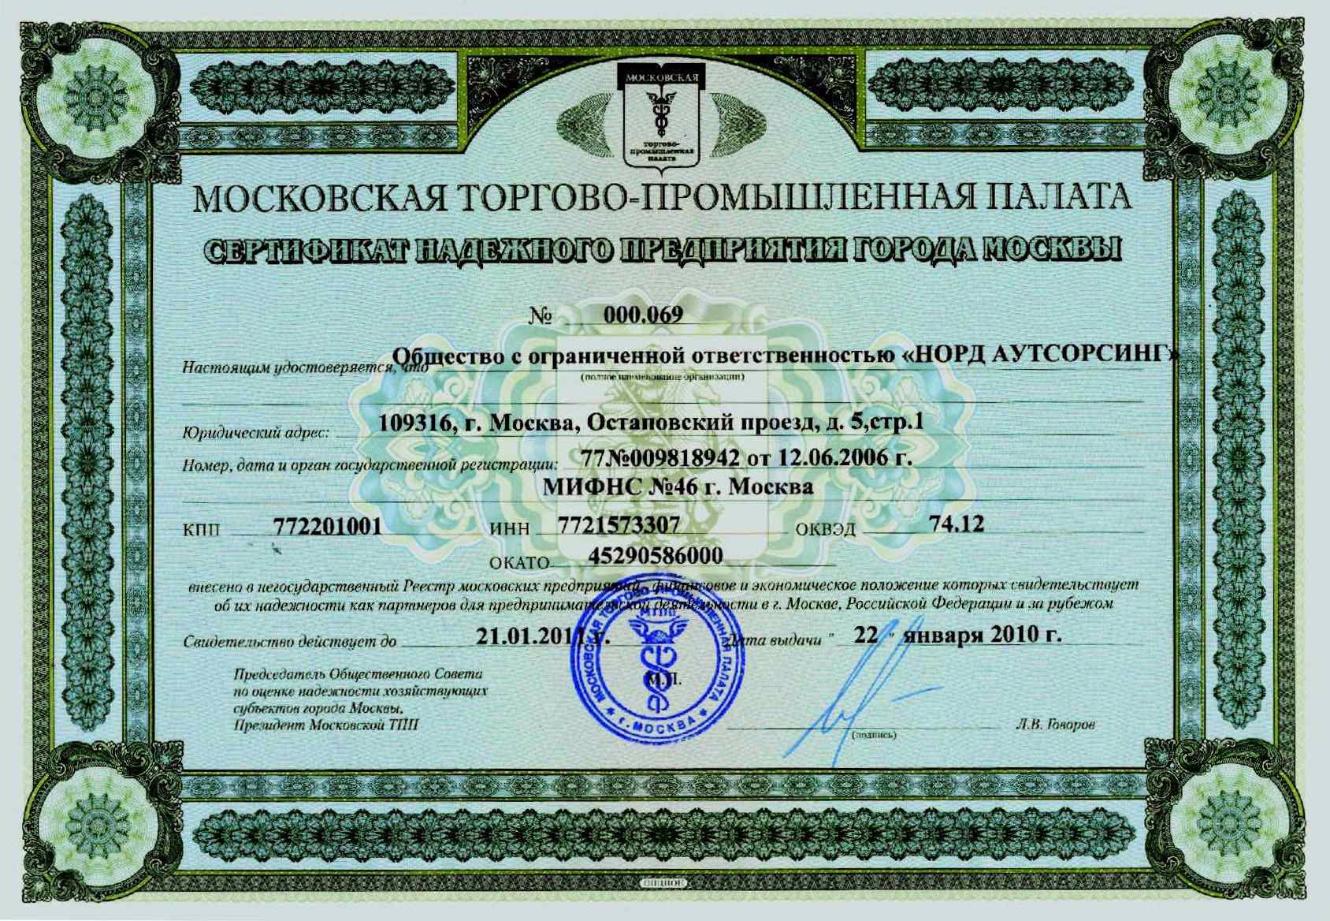 2010 Certificate of a reliable company of Moscow Chamber of Commerce &   Industry